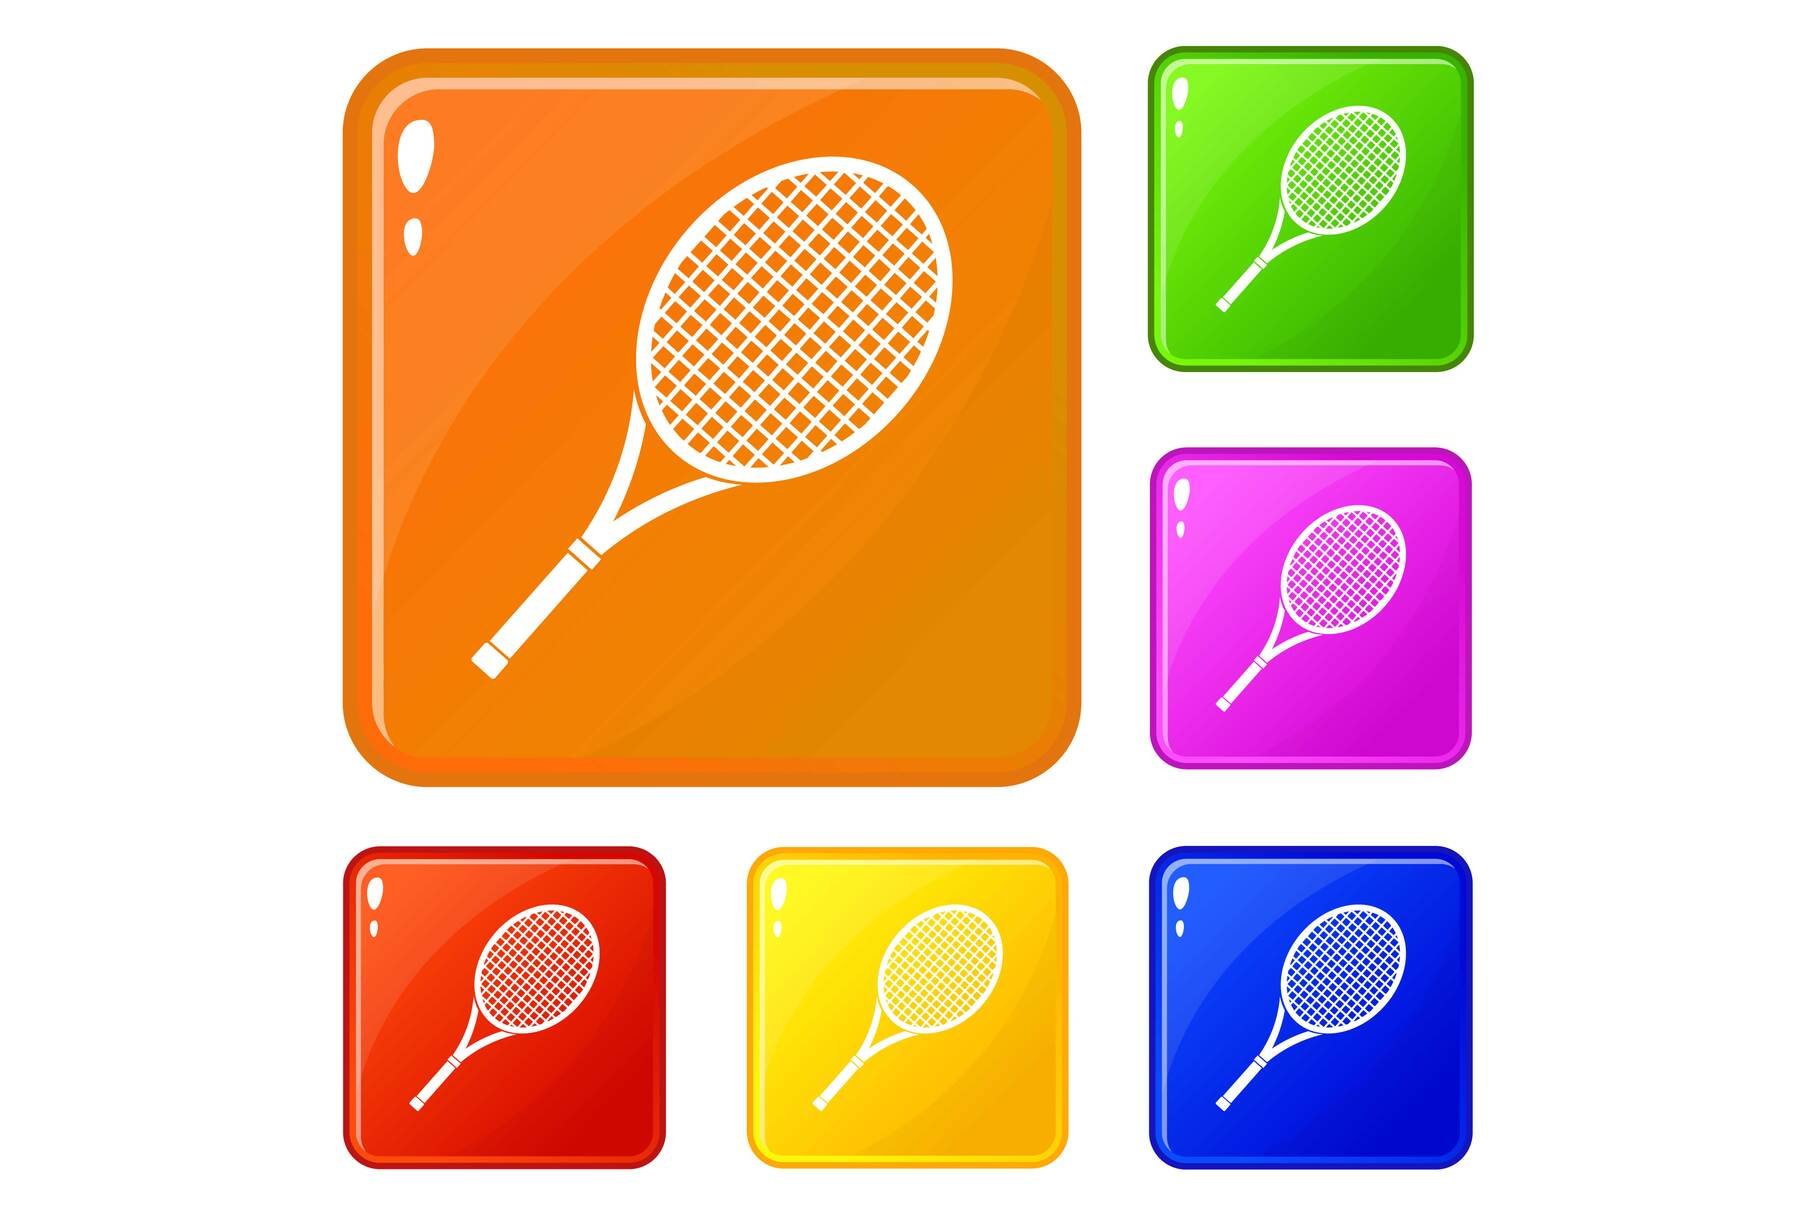 Tennis racket icons set vector color cover image.